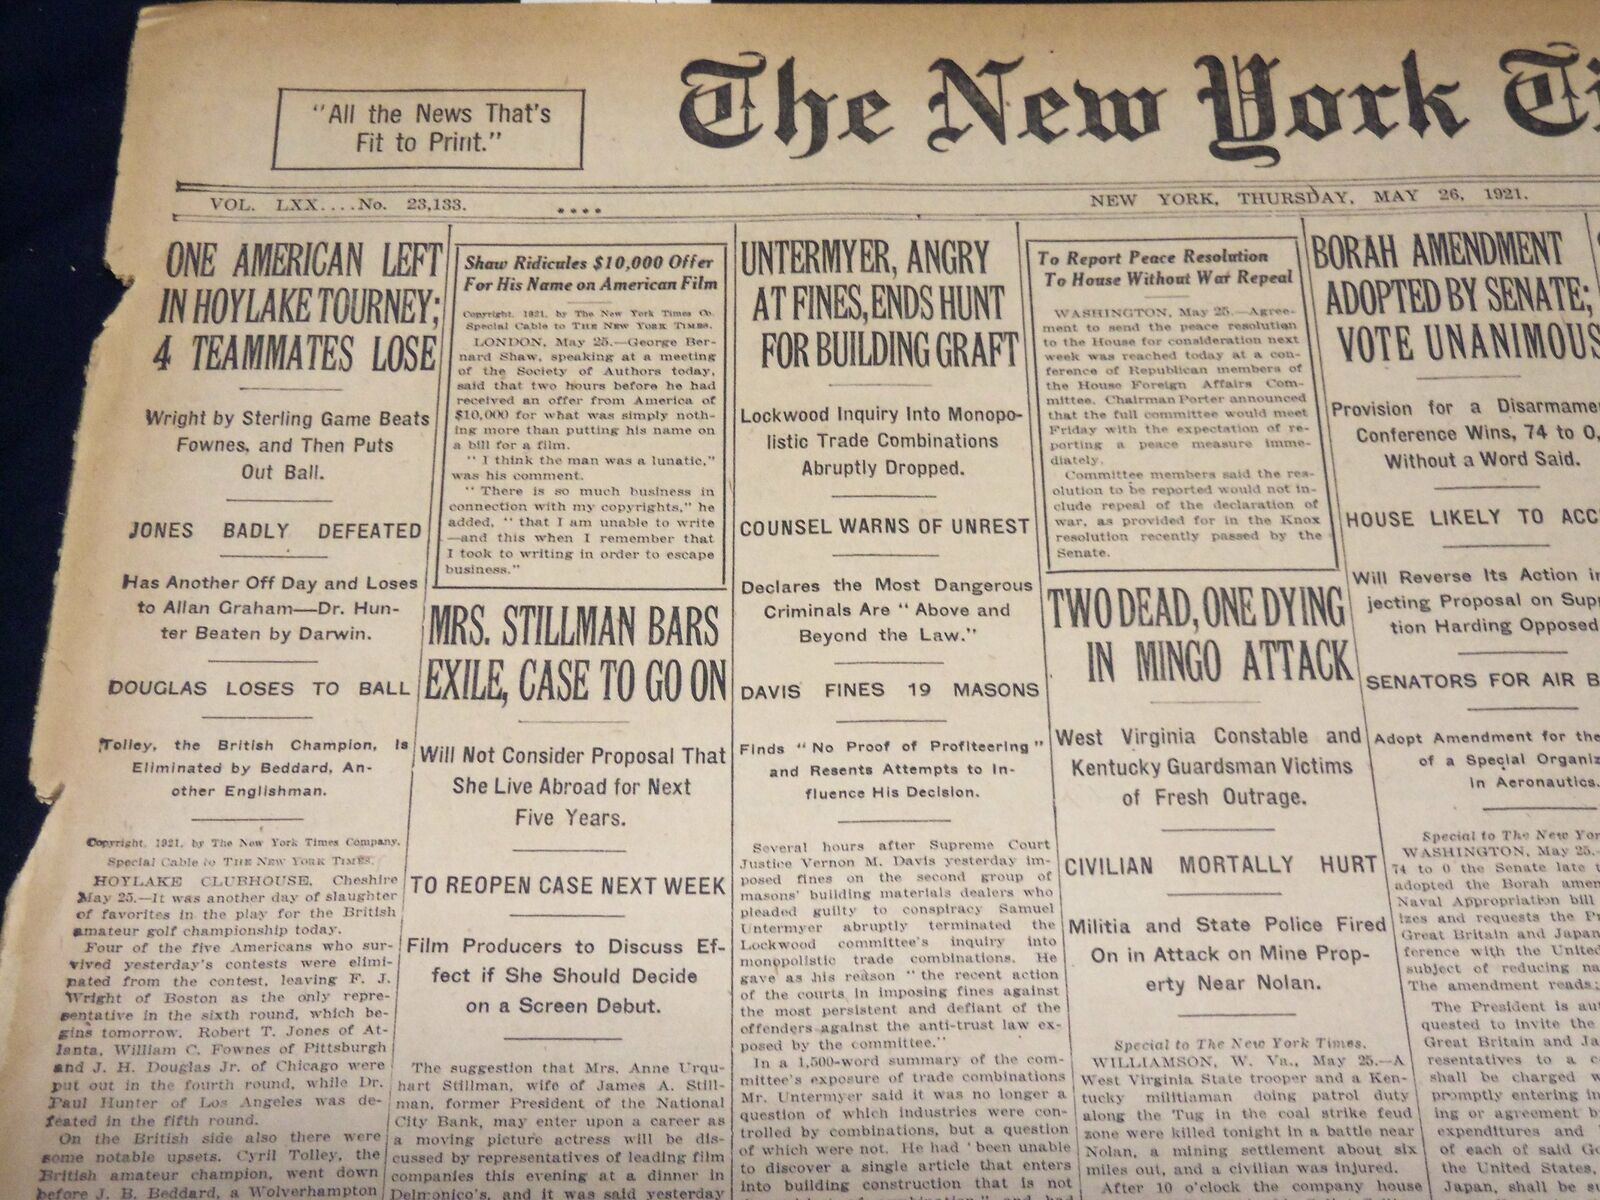 1921 MAY 26 NEW YORK TIMES - ONE AMERICAN LEFT IN HOYLAKE TOURNEY - NT 7857